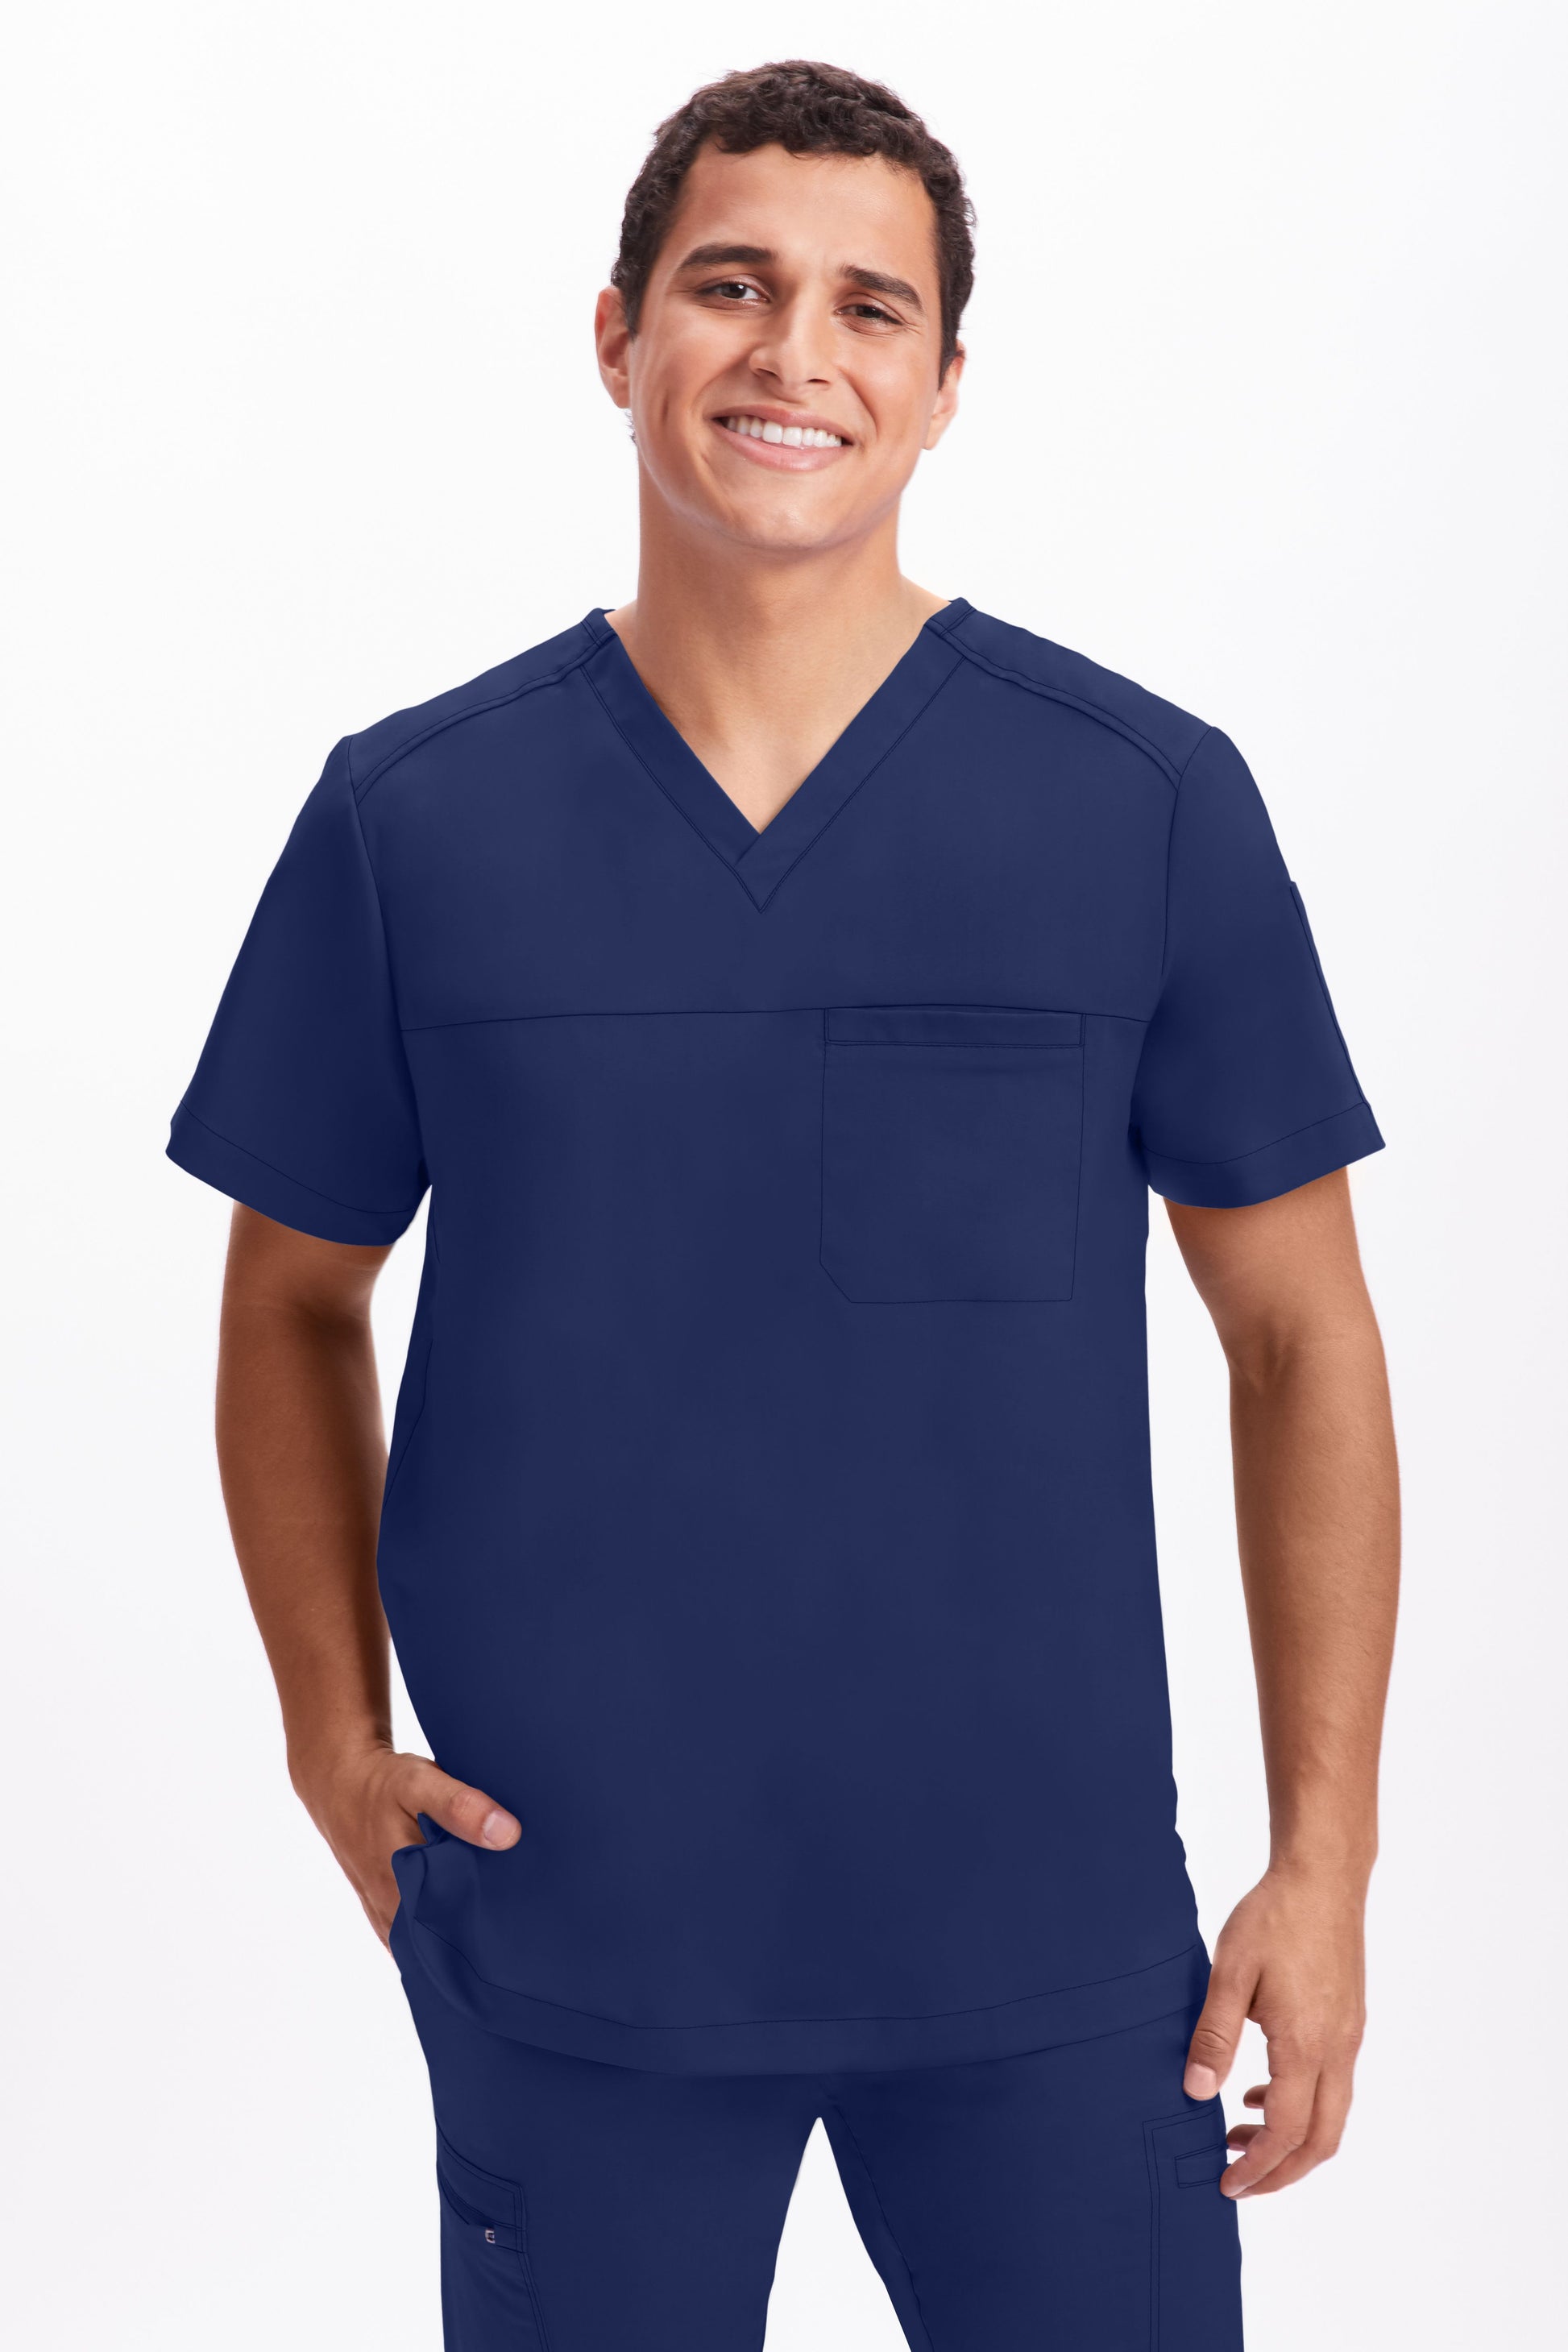 Healing Hands Medical Scrubs for Male and Female